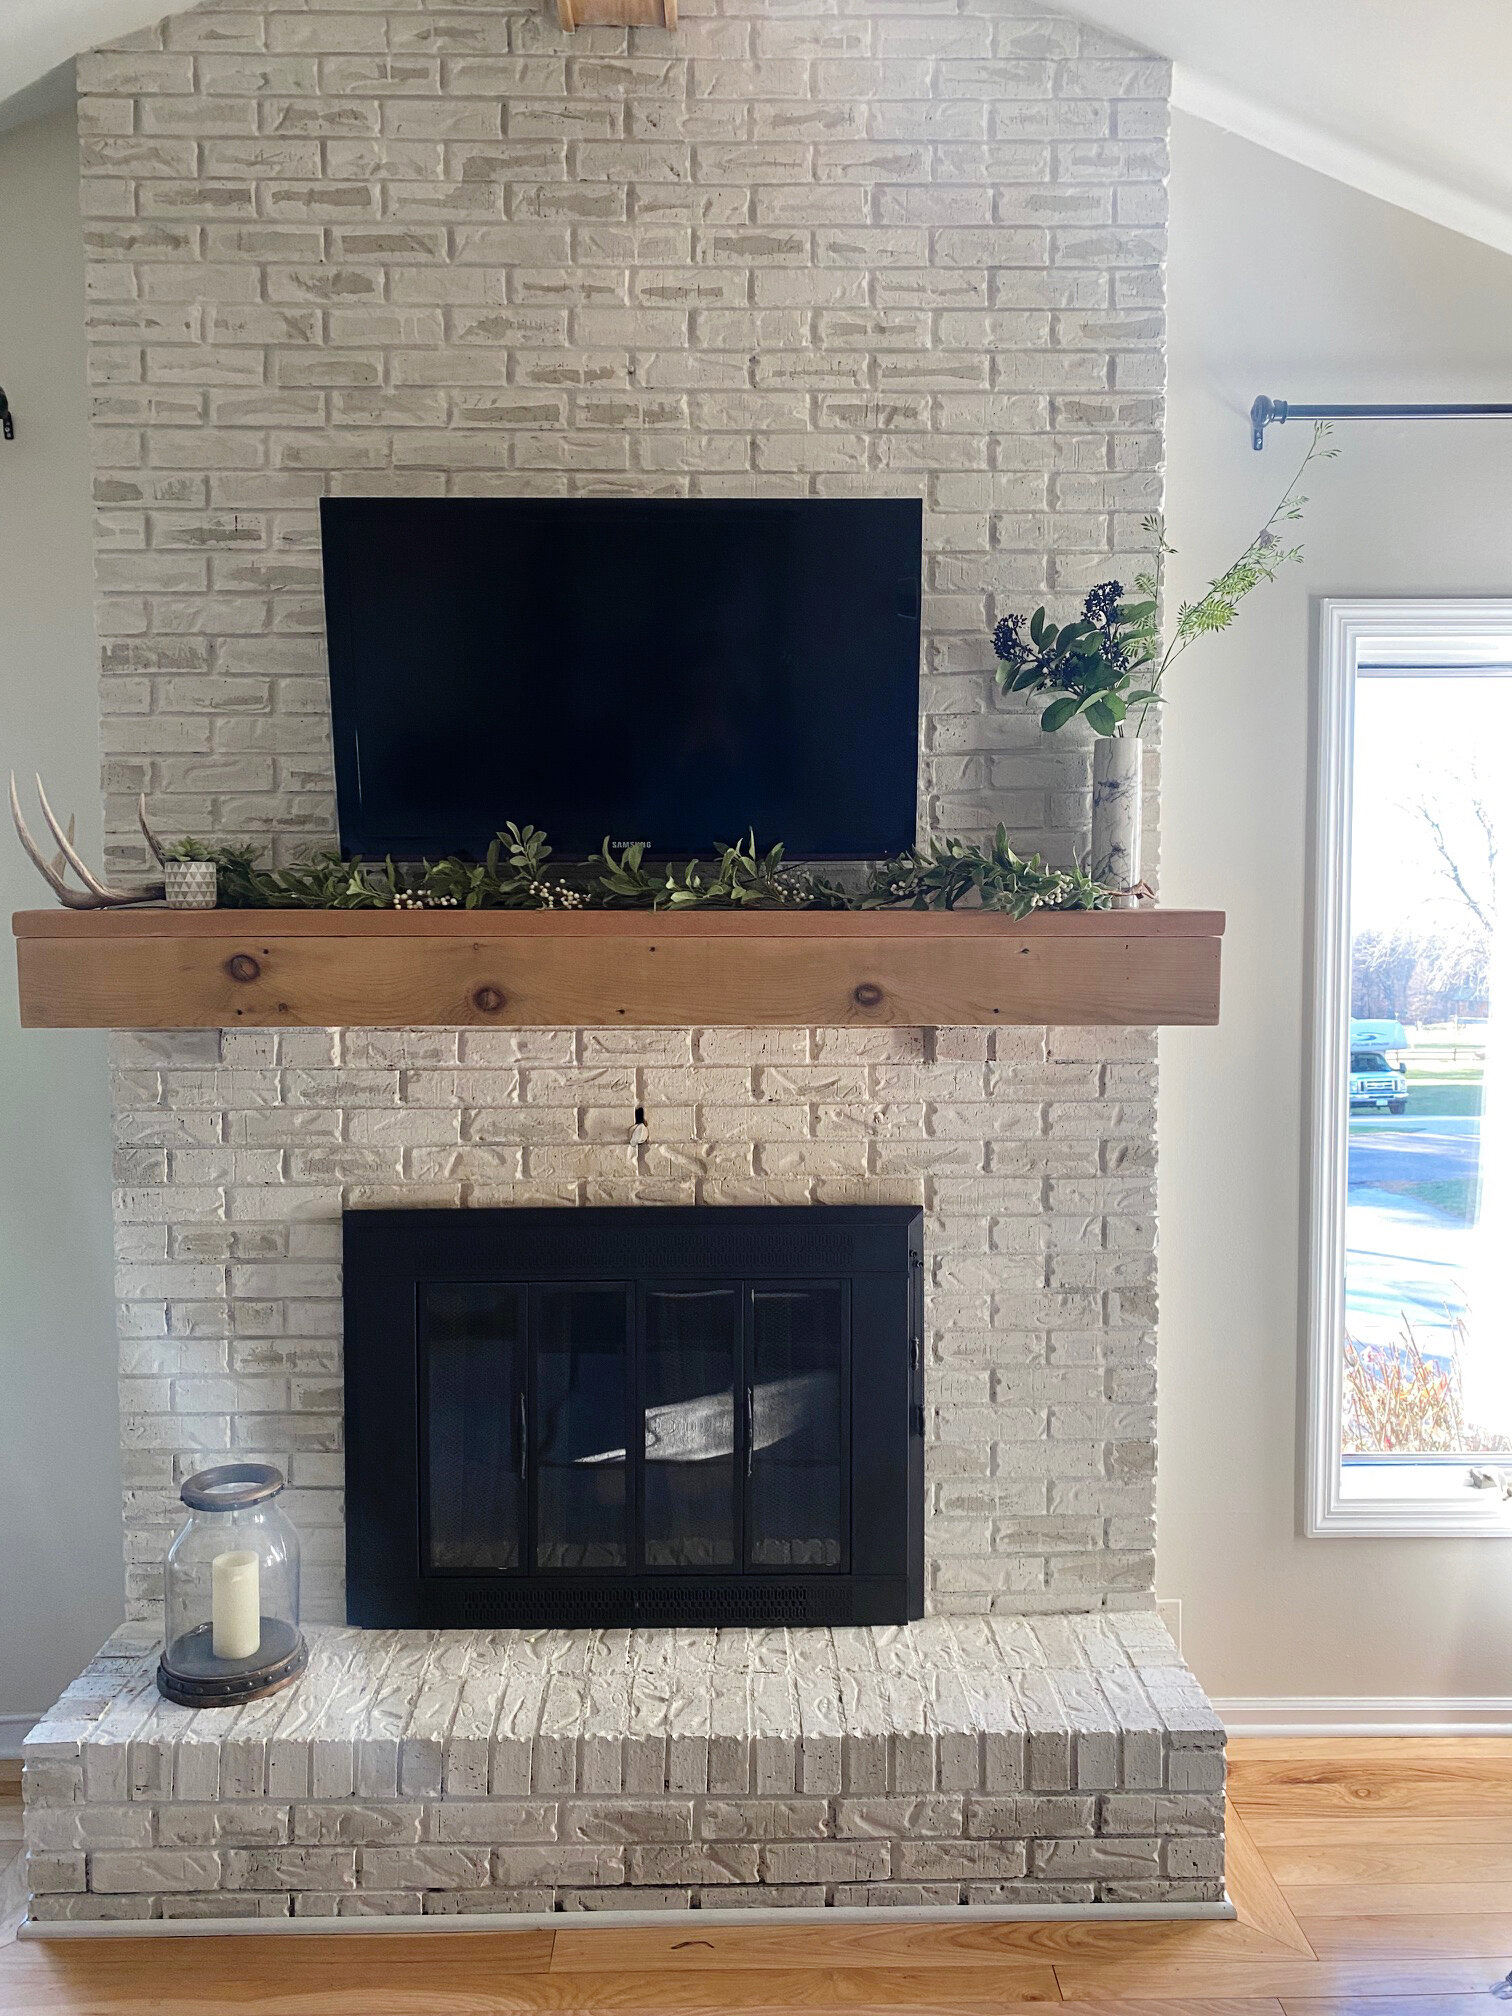 How To Mount A Tv Over Brick Fireplace, How To Put A Tv Over Brick Fireplace